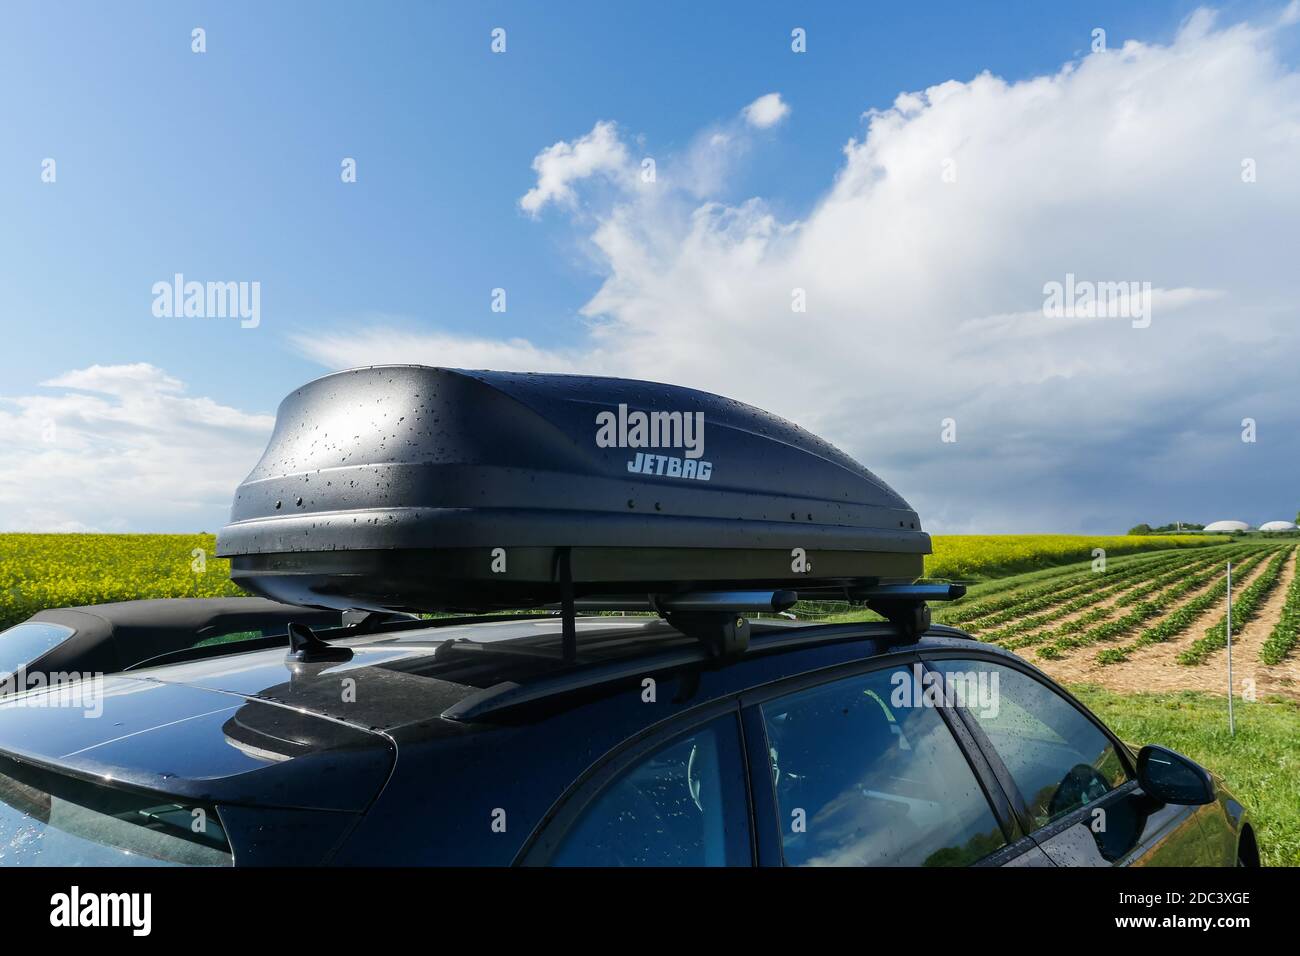 Jetbag car rooftop storage container box in agricultural field in